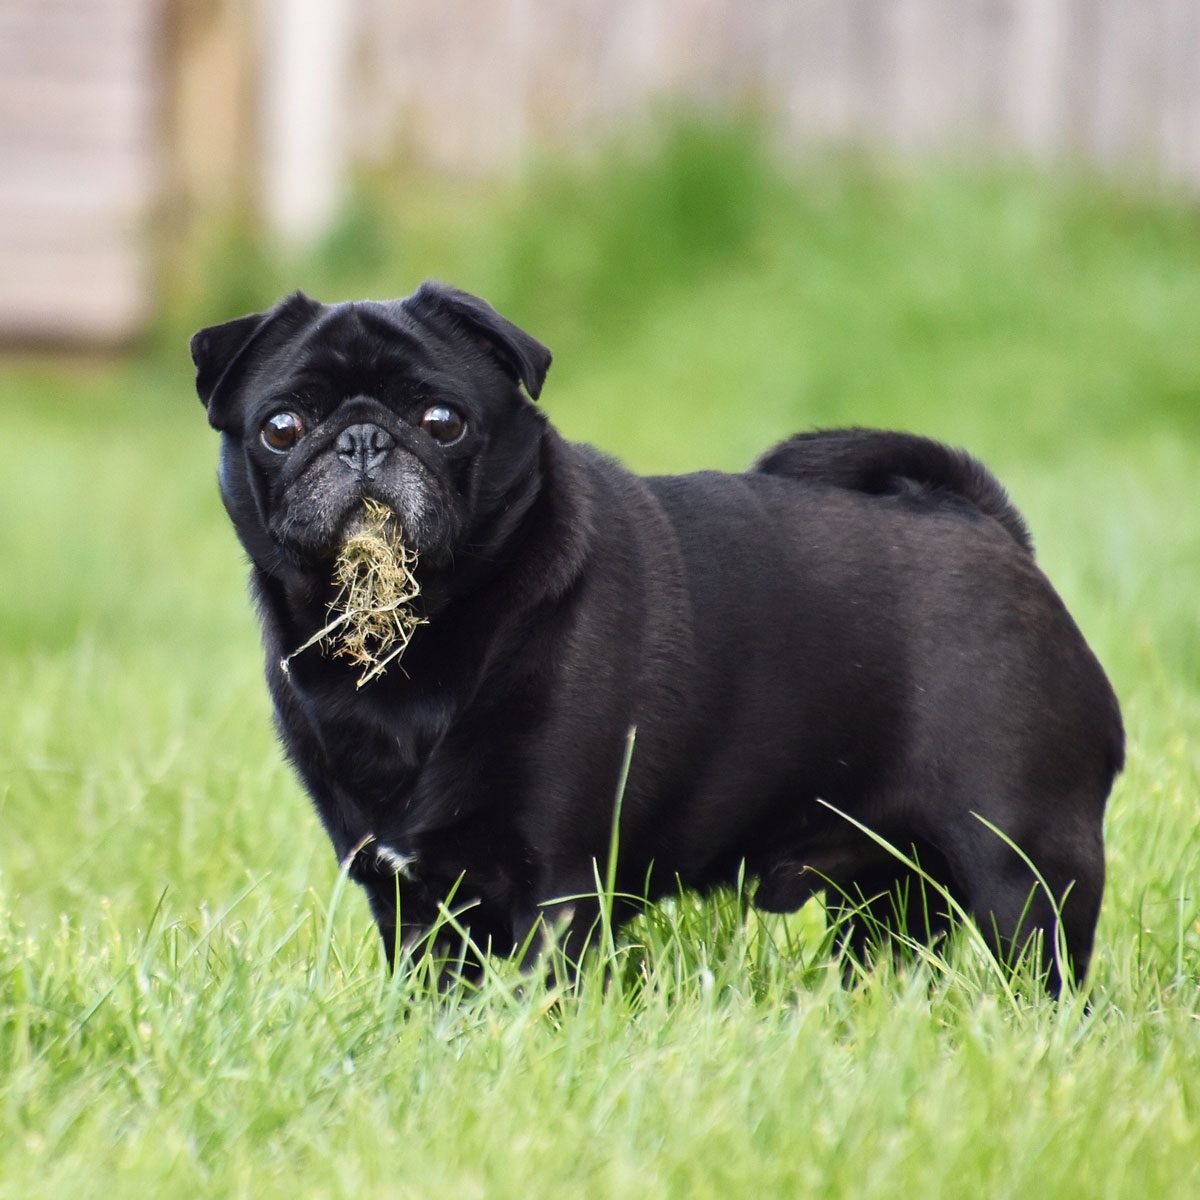 is grass okay for dogs to eat